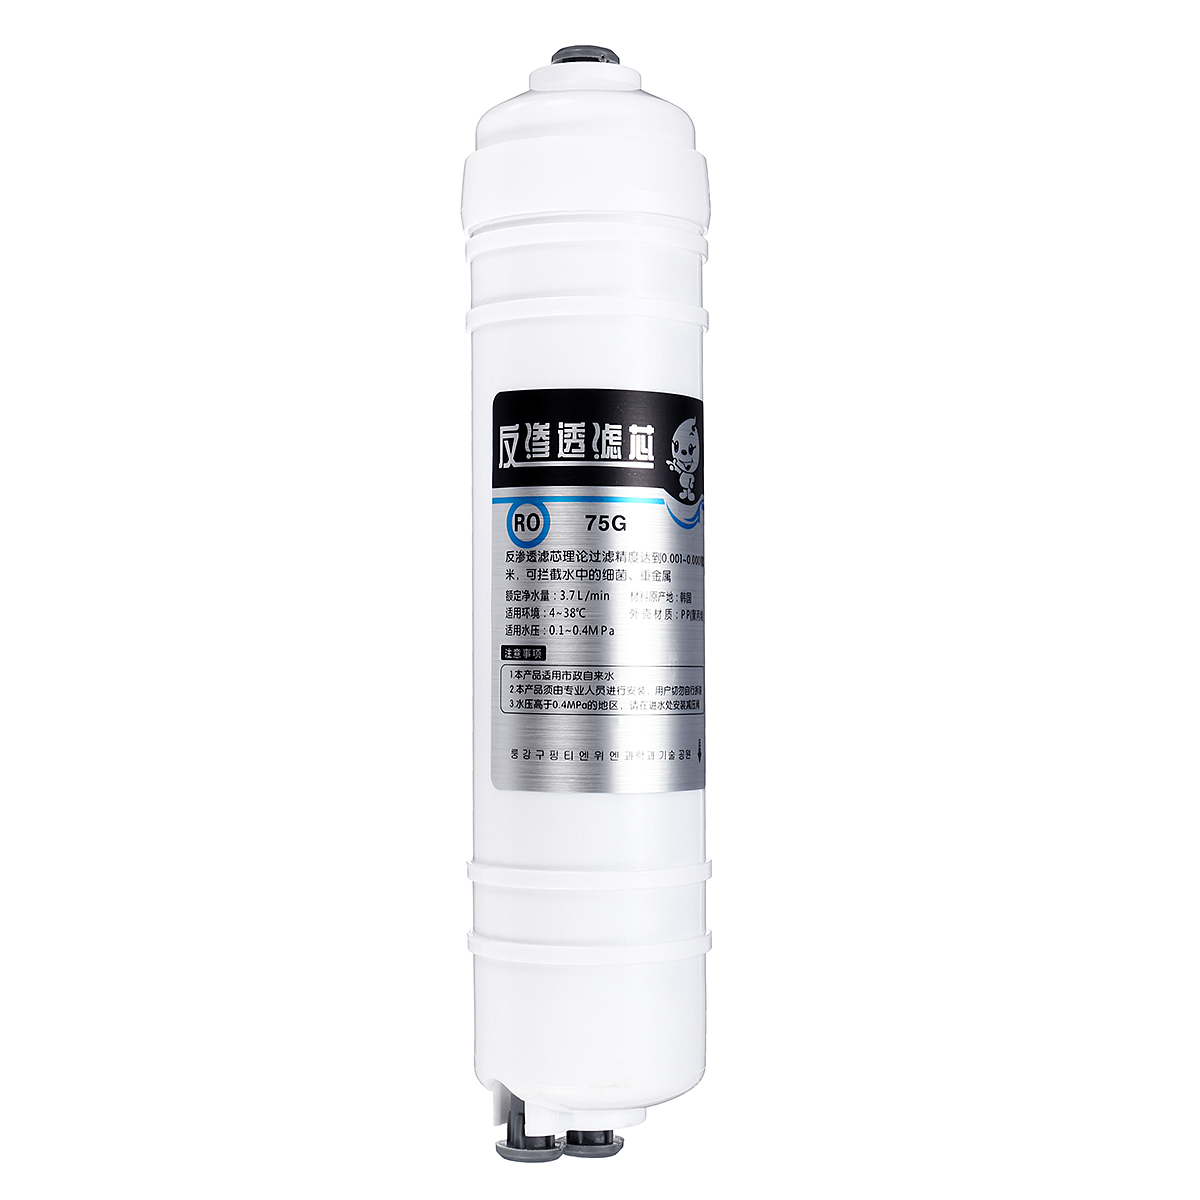 

75G Water Filter RO Membrane Filter for Pure Water Purifier Reverse Osmosis System RO Water Purifier Filter Element